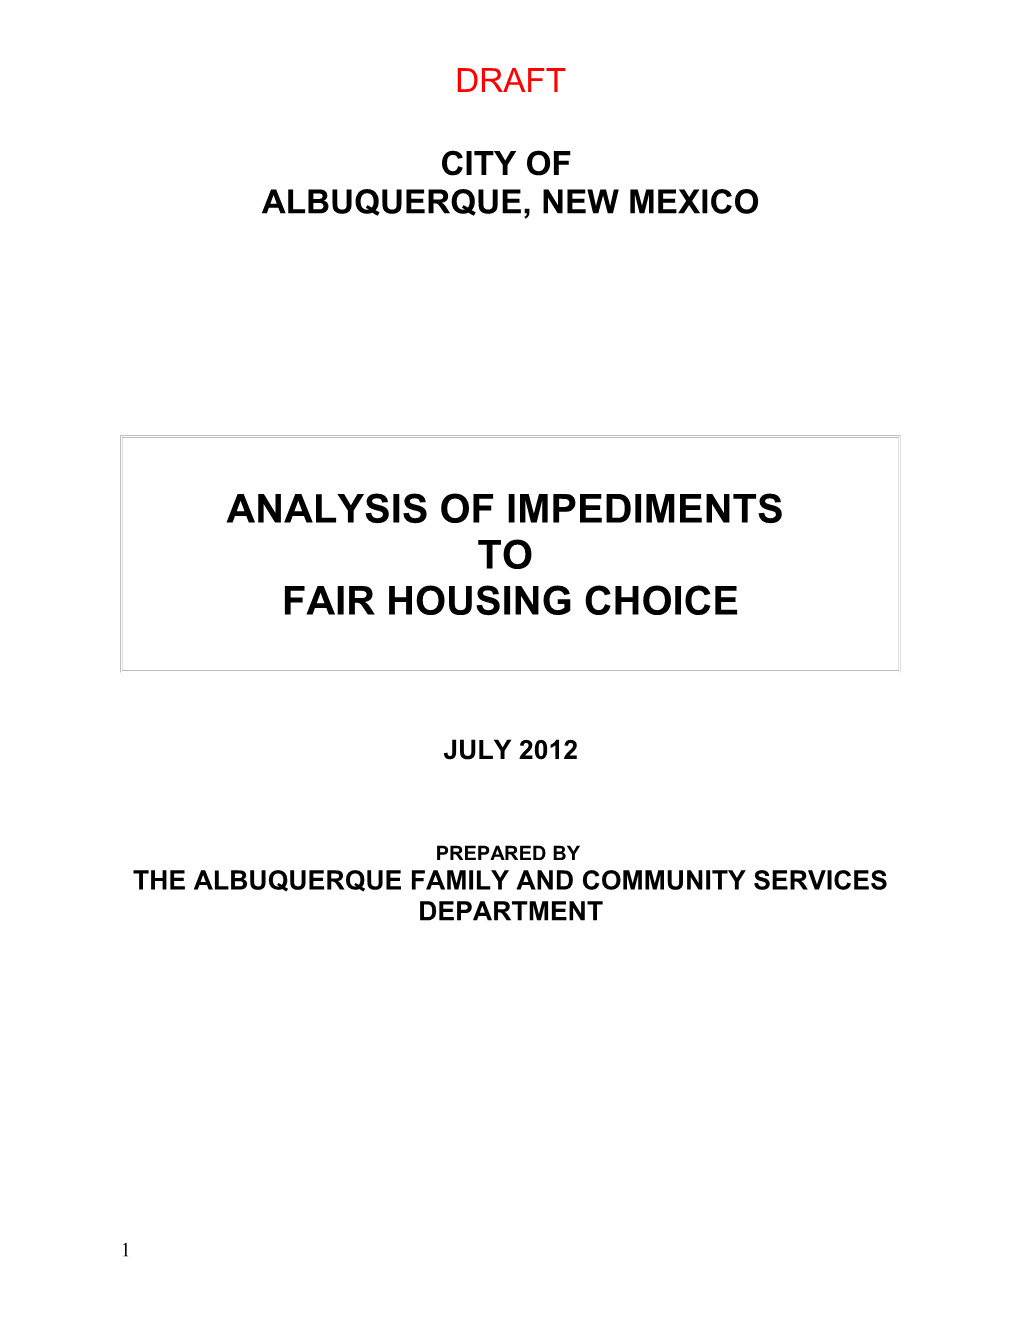 The Albuquerque Family and Community Services Department